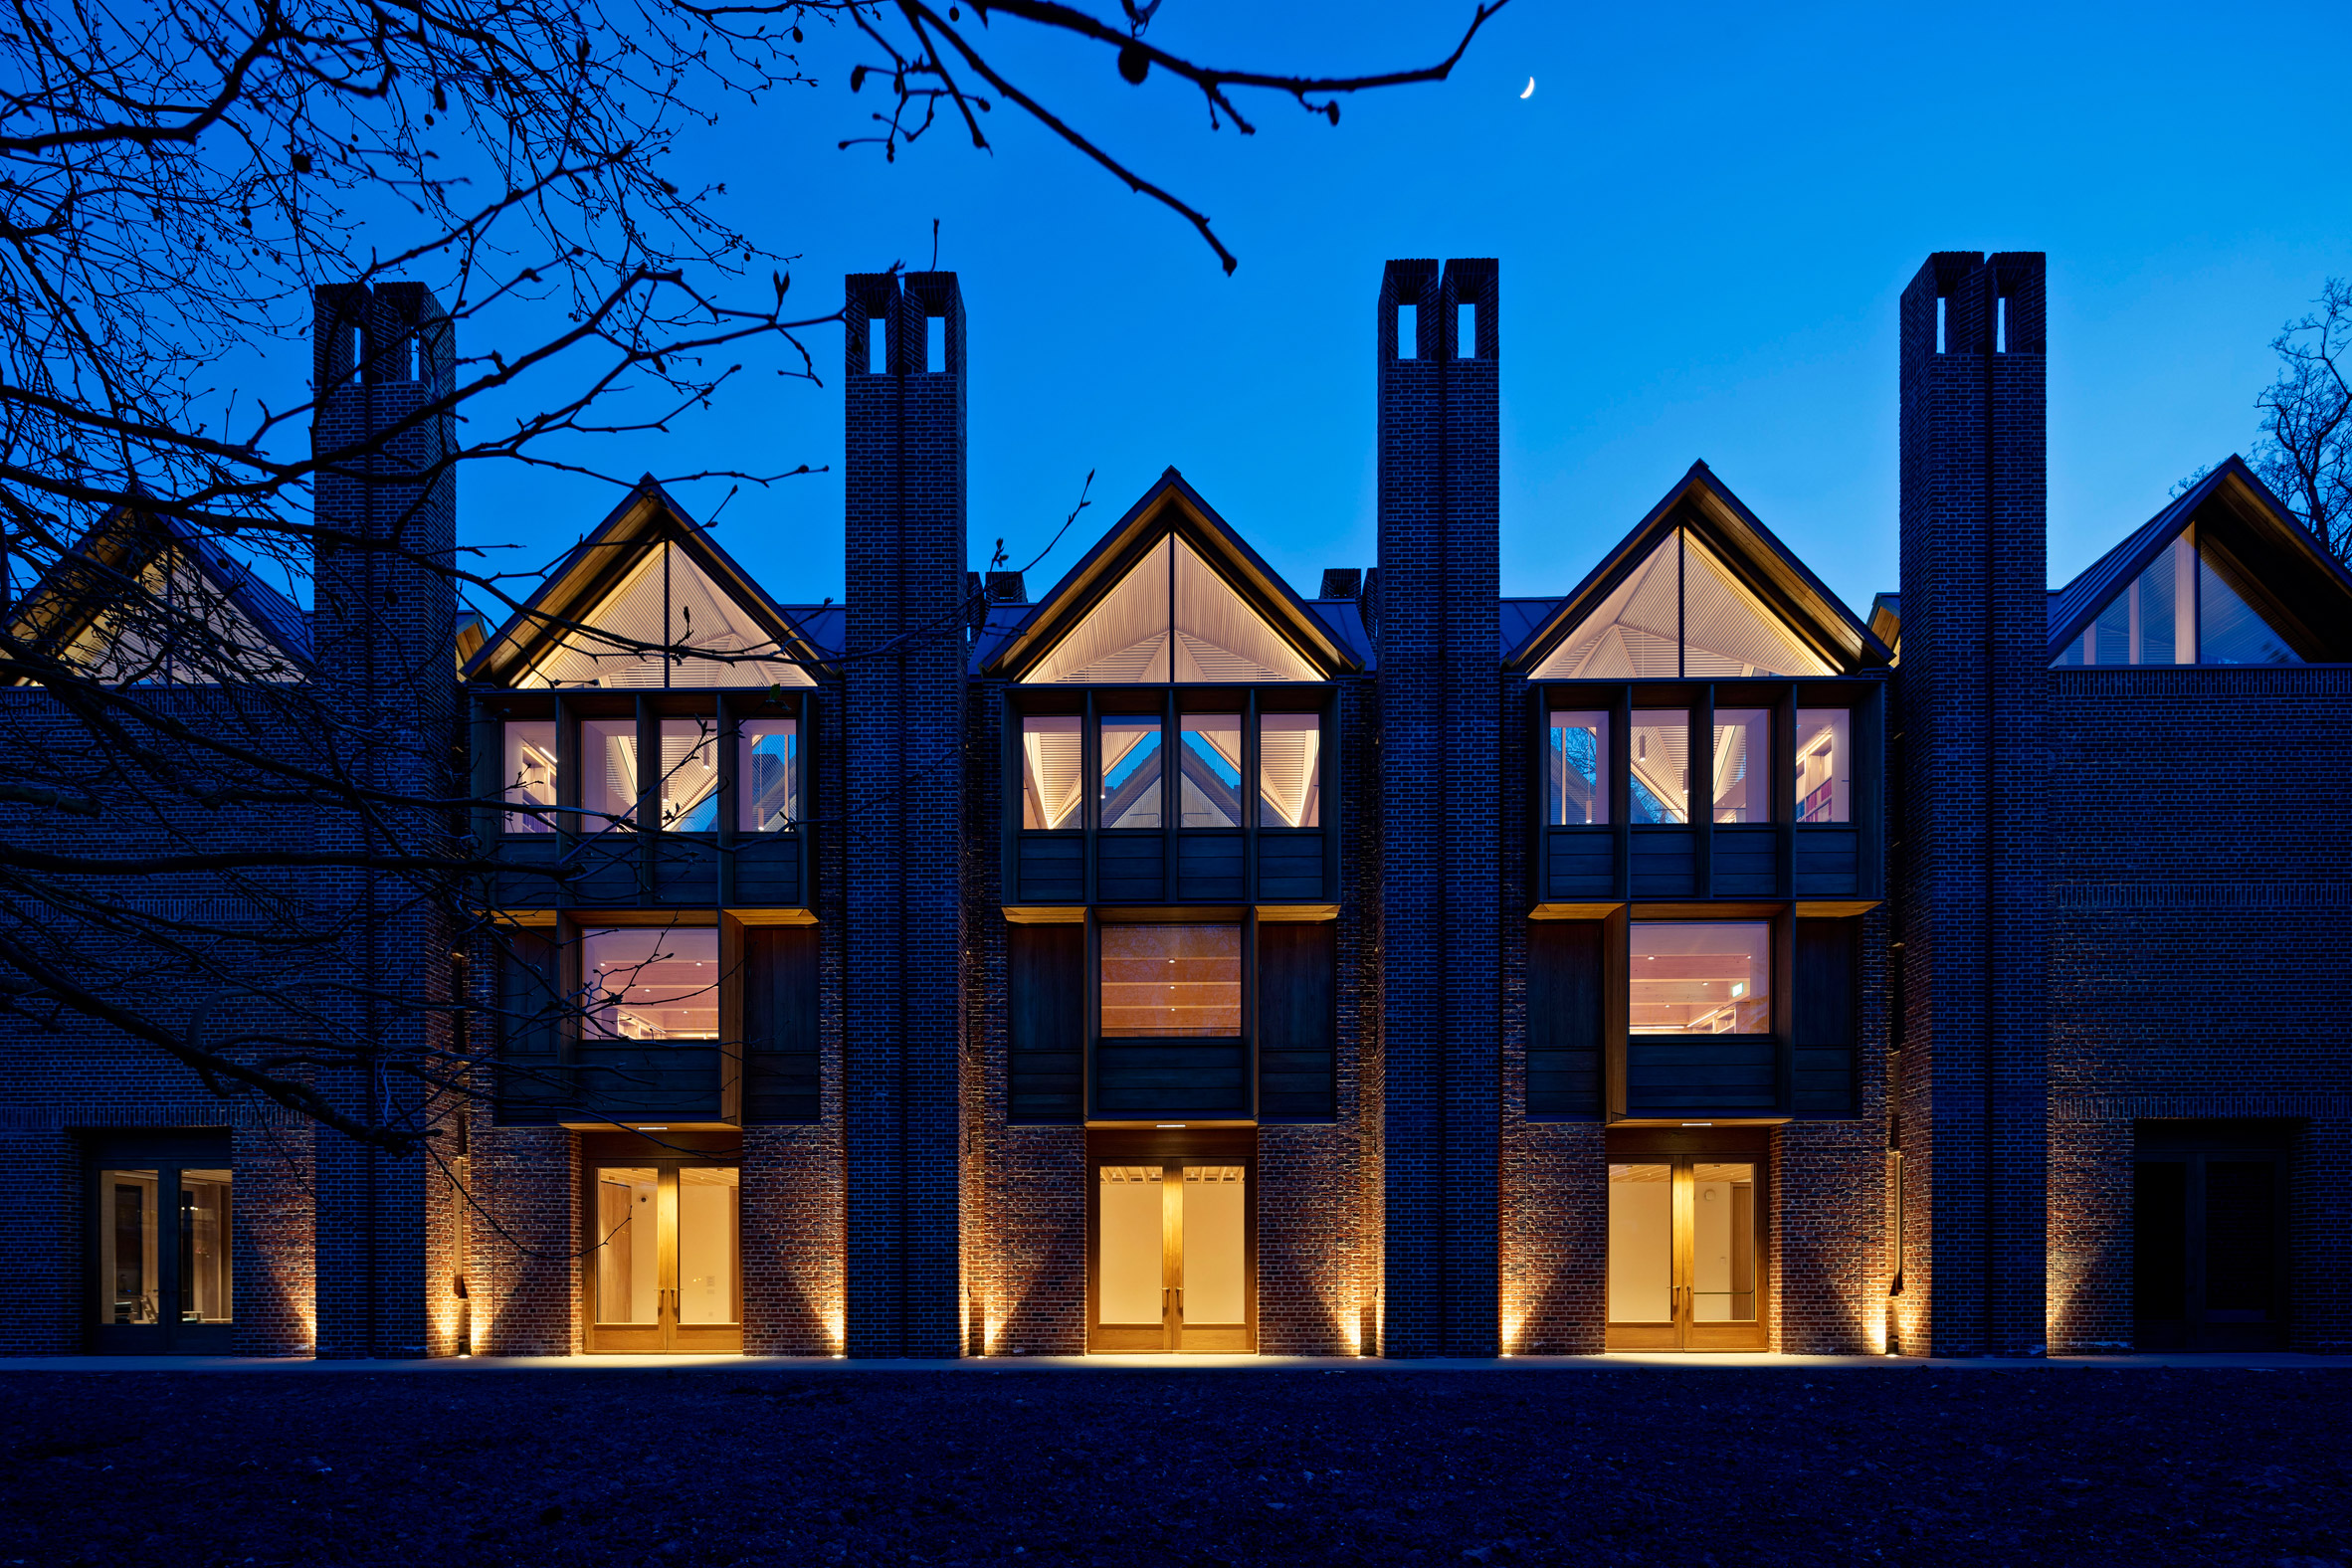 The new library at Magdalene College by Niall McLaughlin Architects.  from the shortlist of the 2022 Stirling Prize